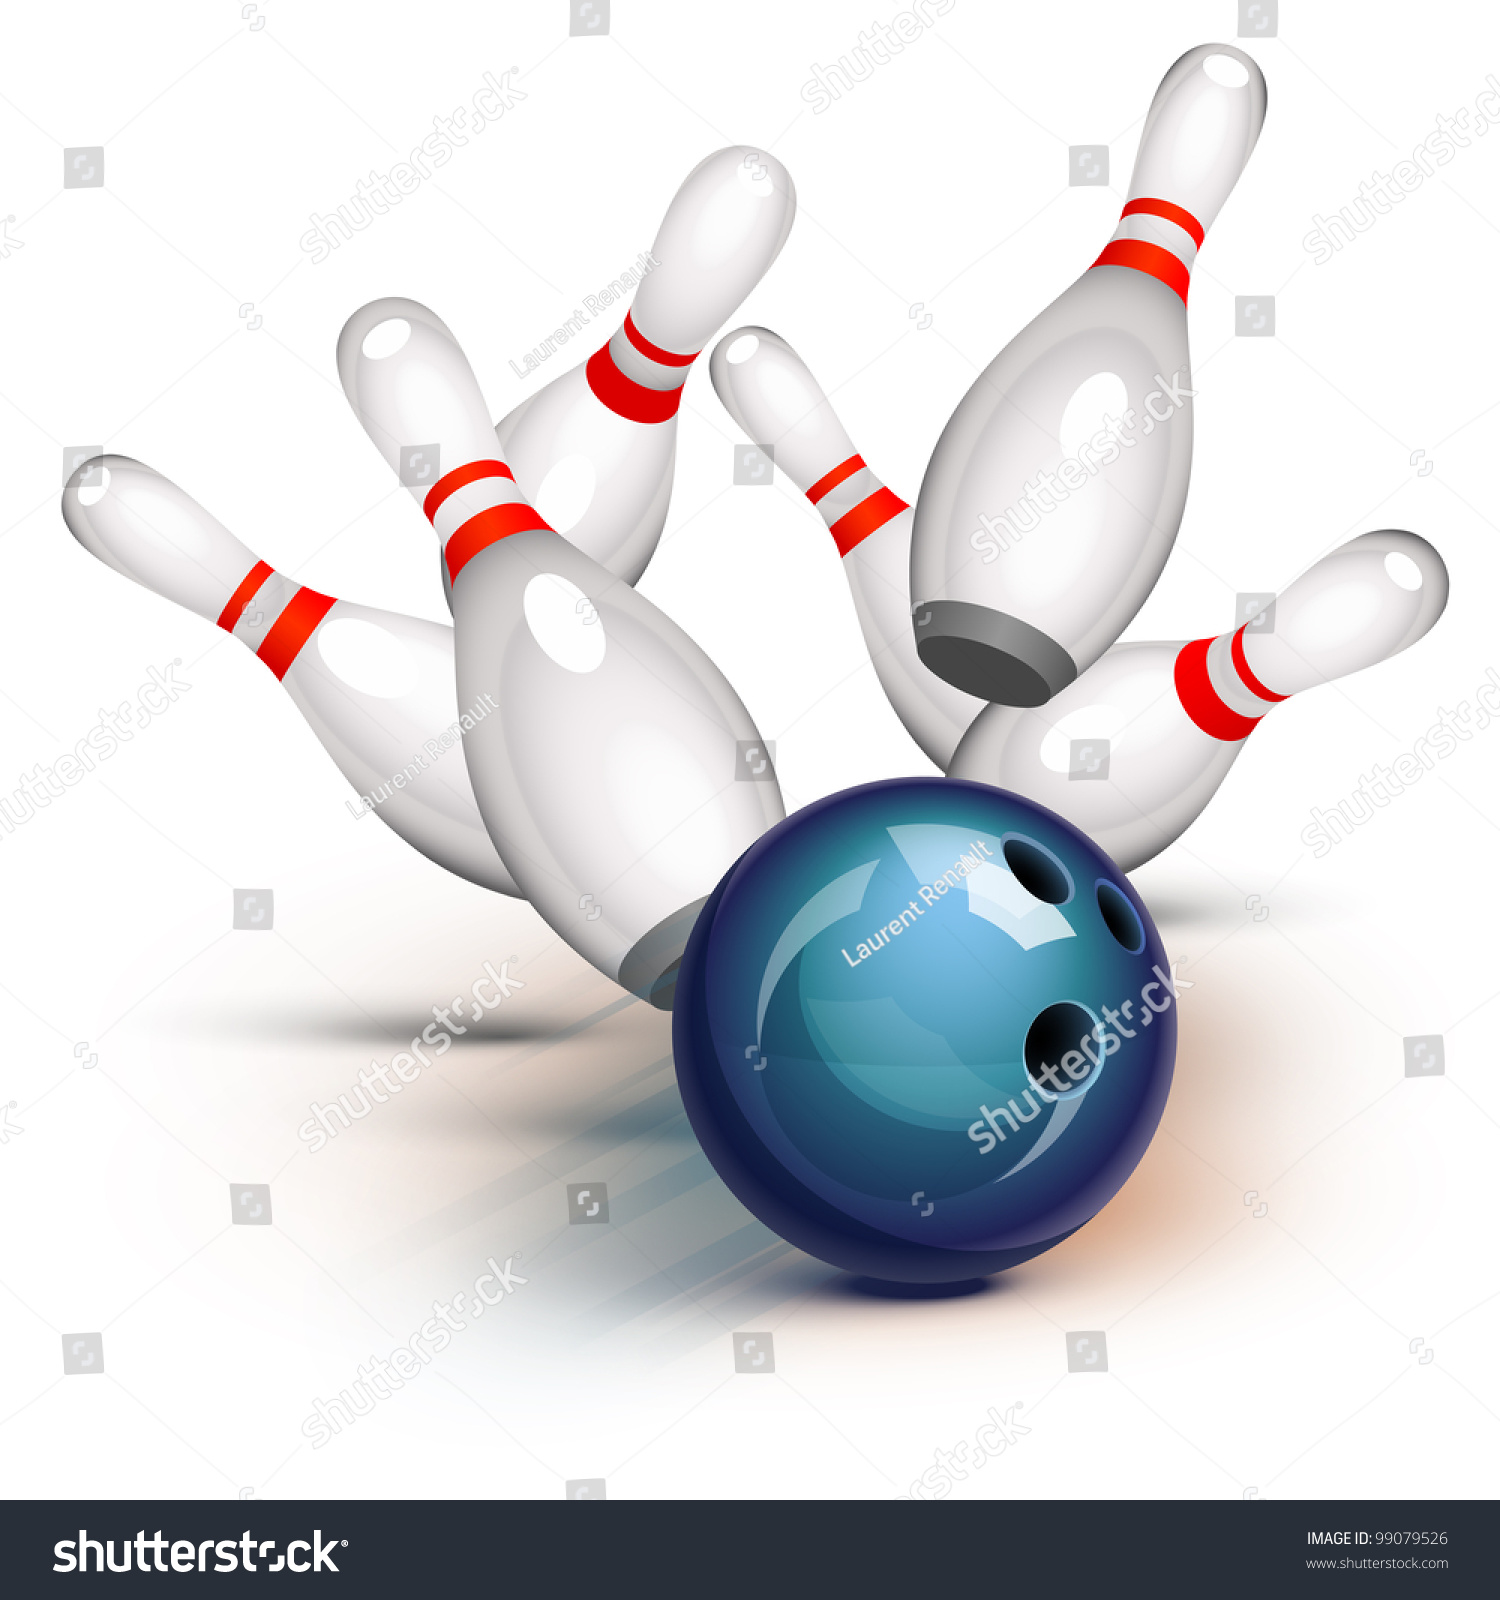 Bowling ball pins Stock Illustrations, Images & Vectors Shutterstock.